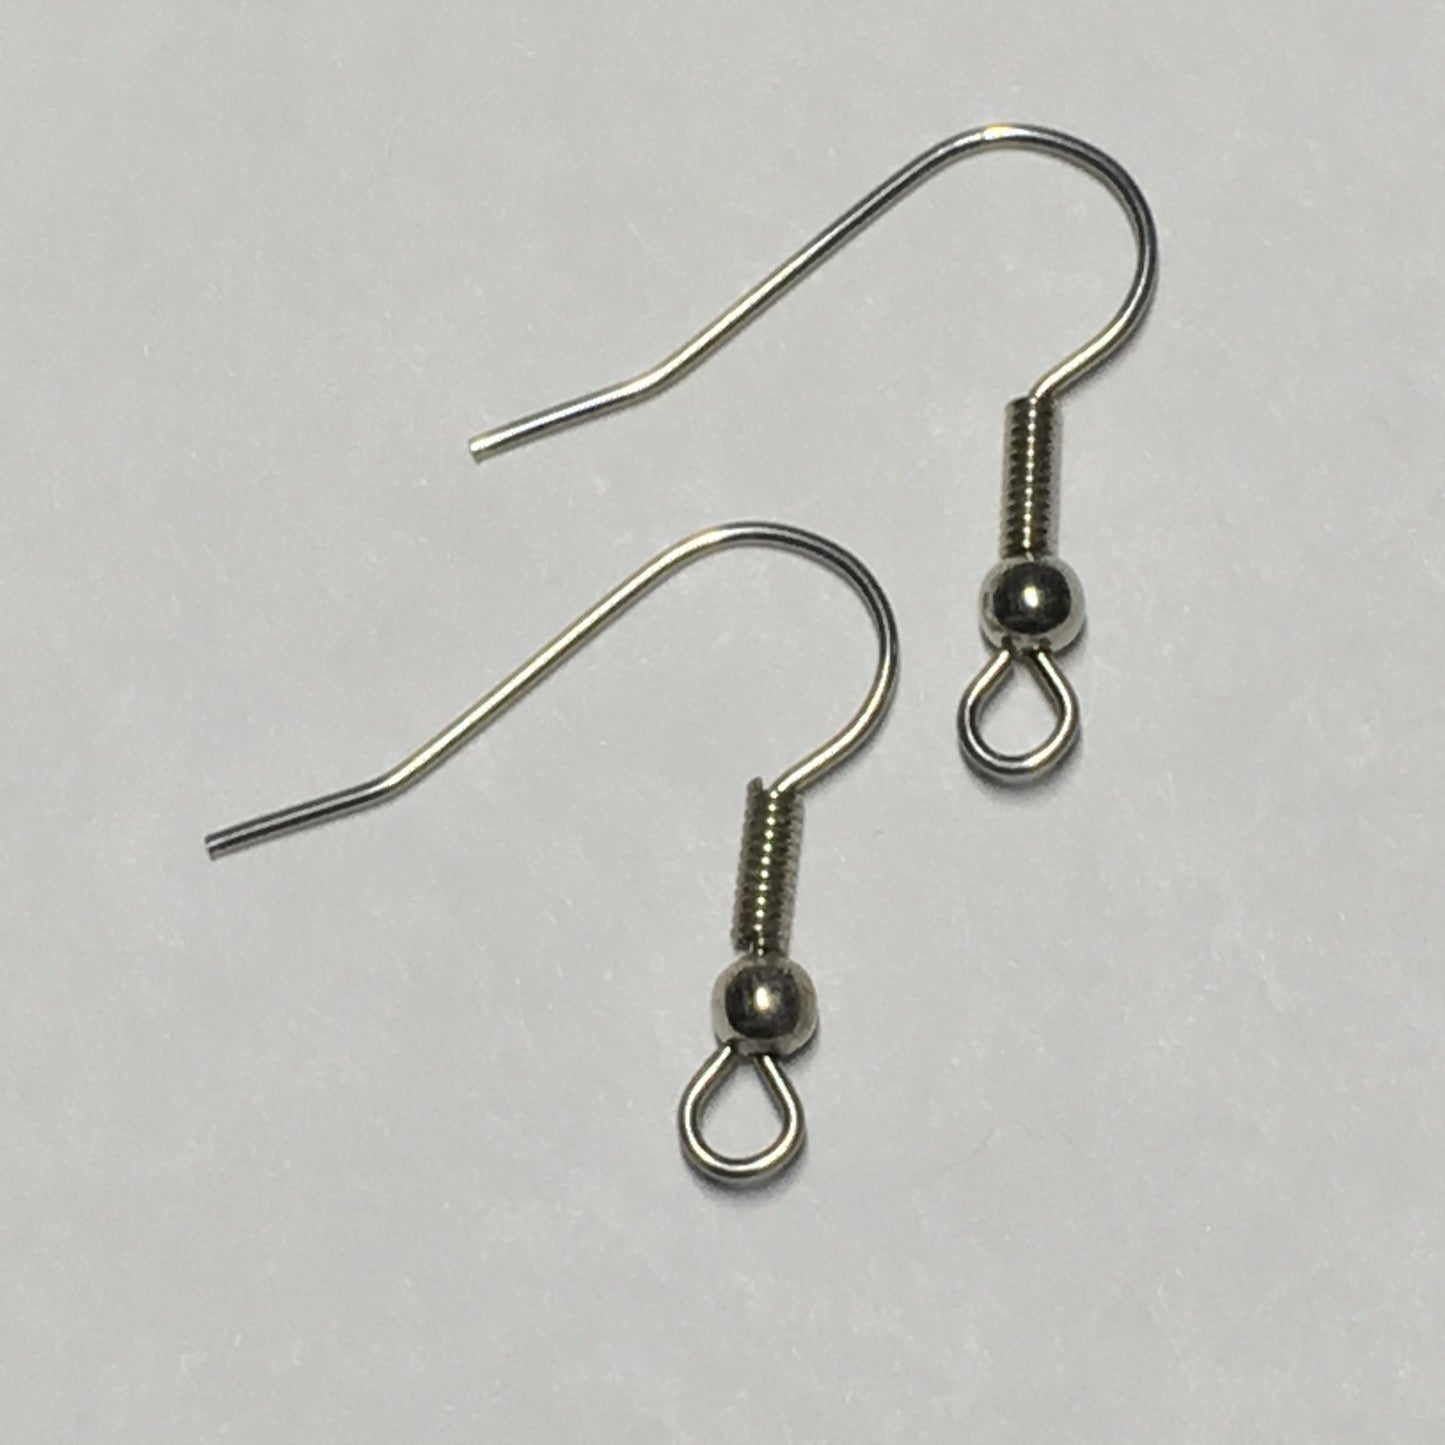 21-Gauge 22 mm Stainless Steel French Fish Hook Hypoallergenic Ear Wires - 1, 5 or 10 Pair